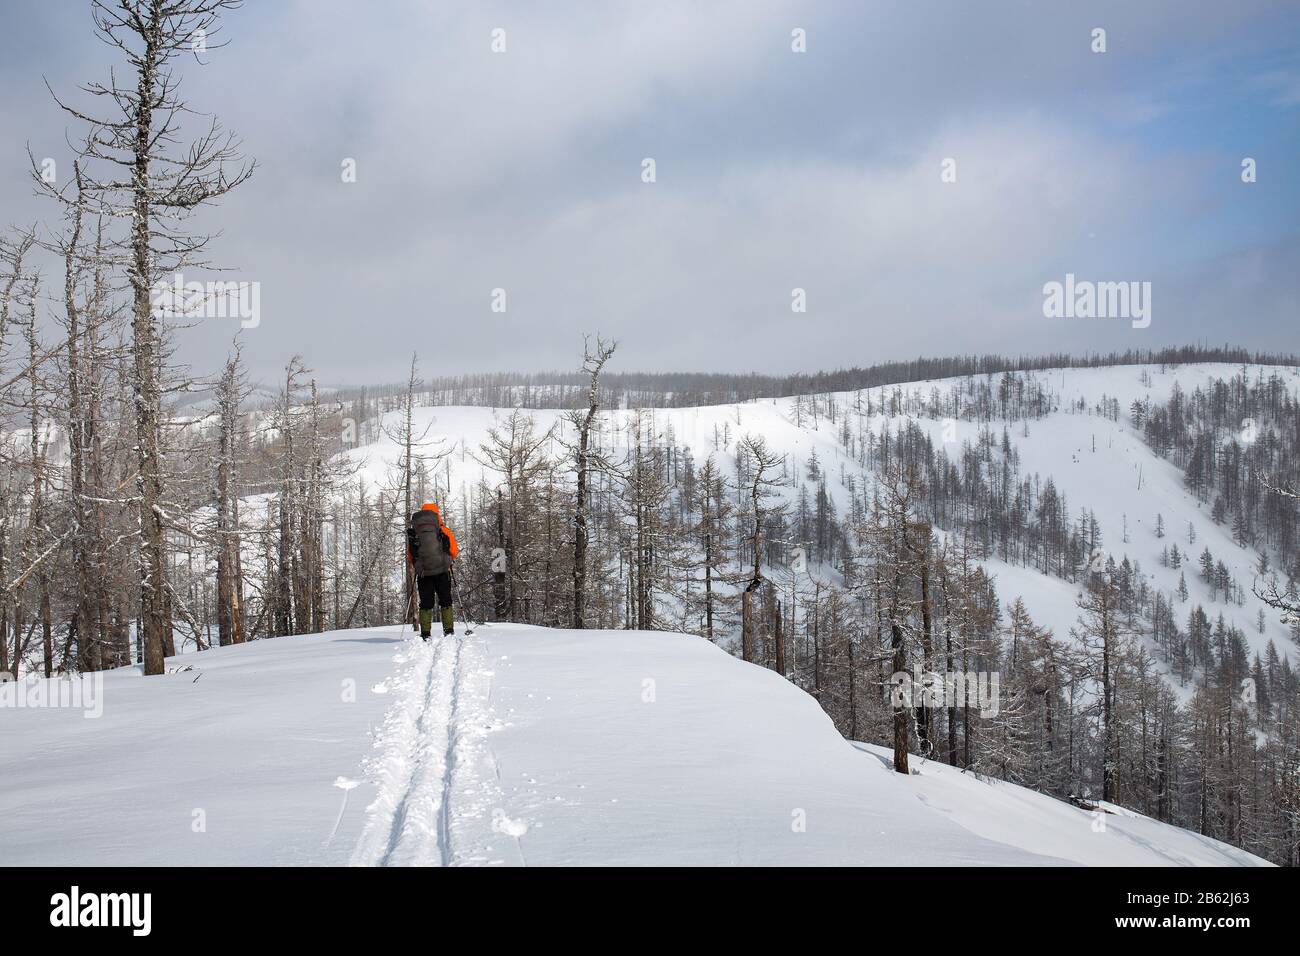 skiing trails man with backpack on snowy mountains Ridge Stock Photo